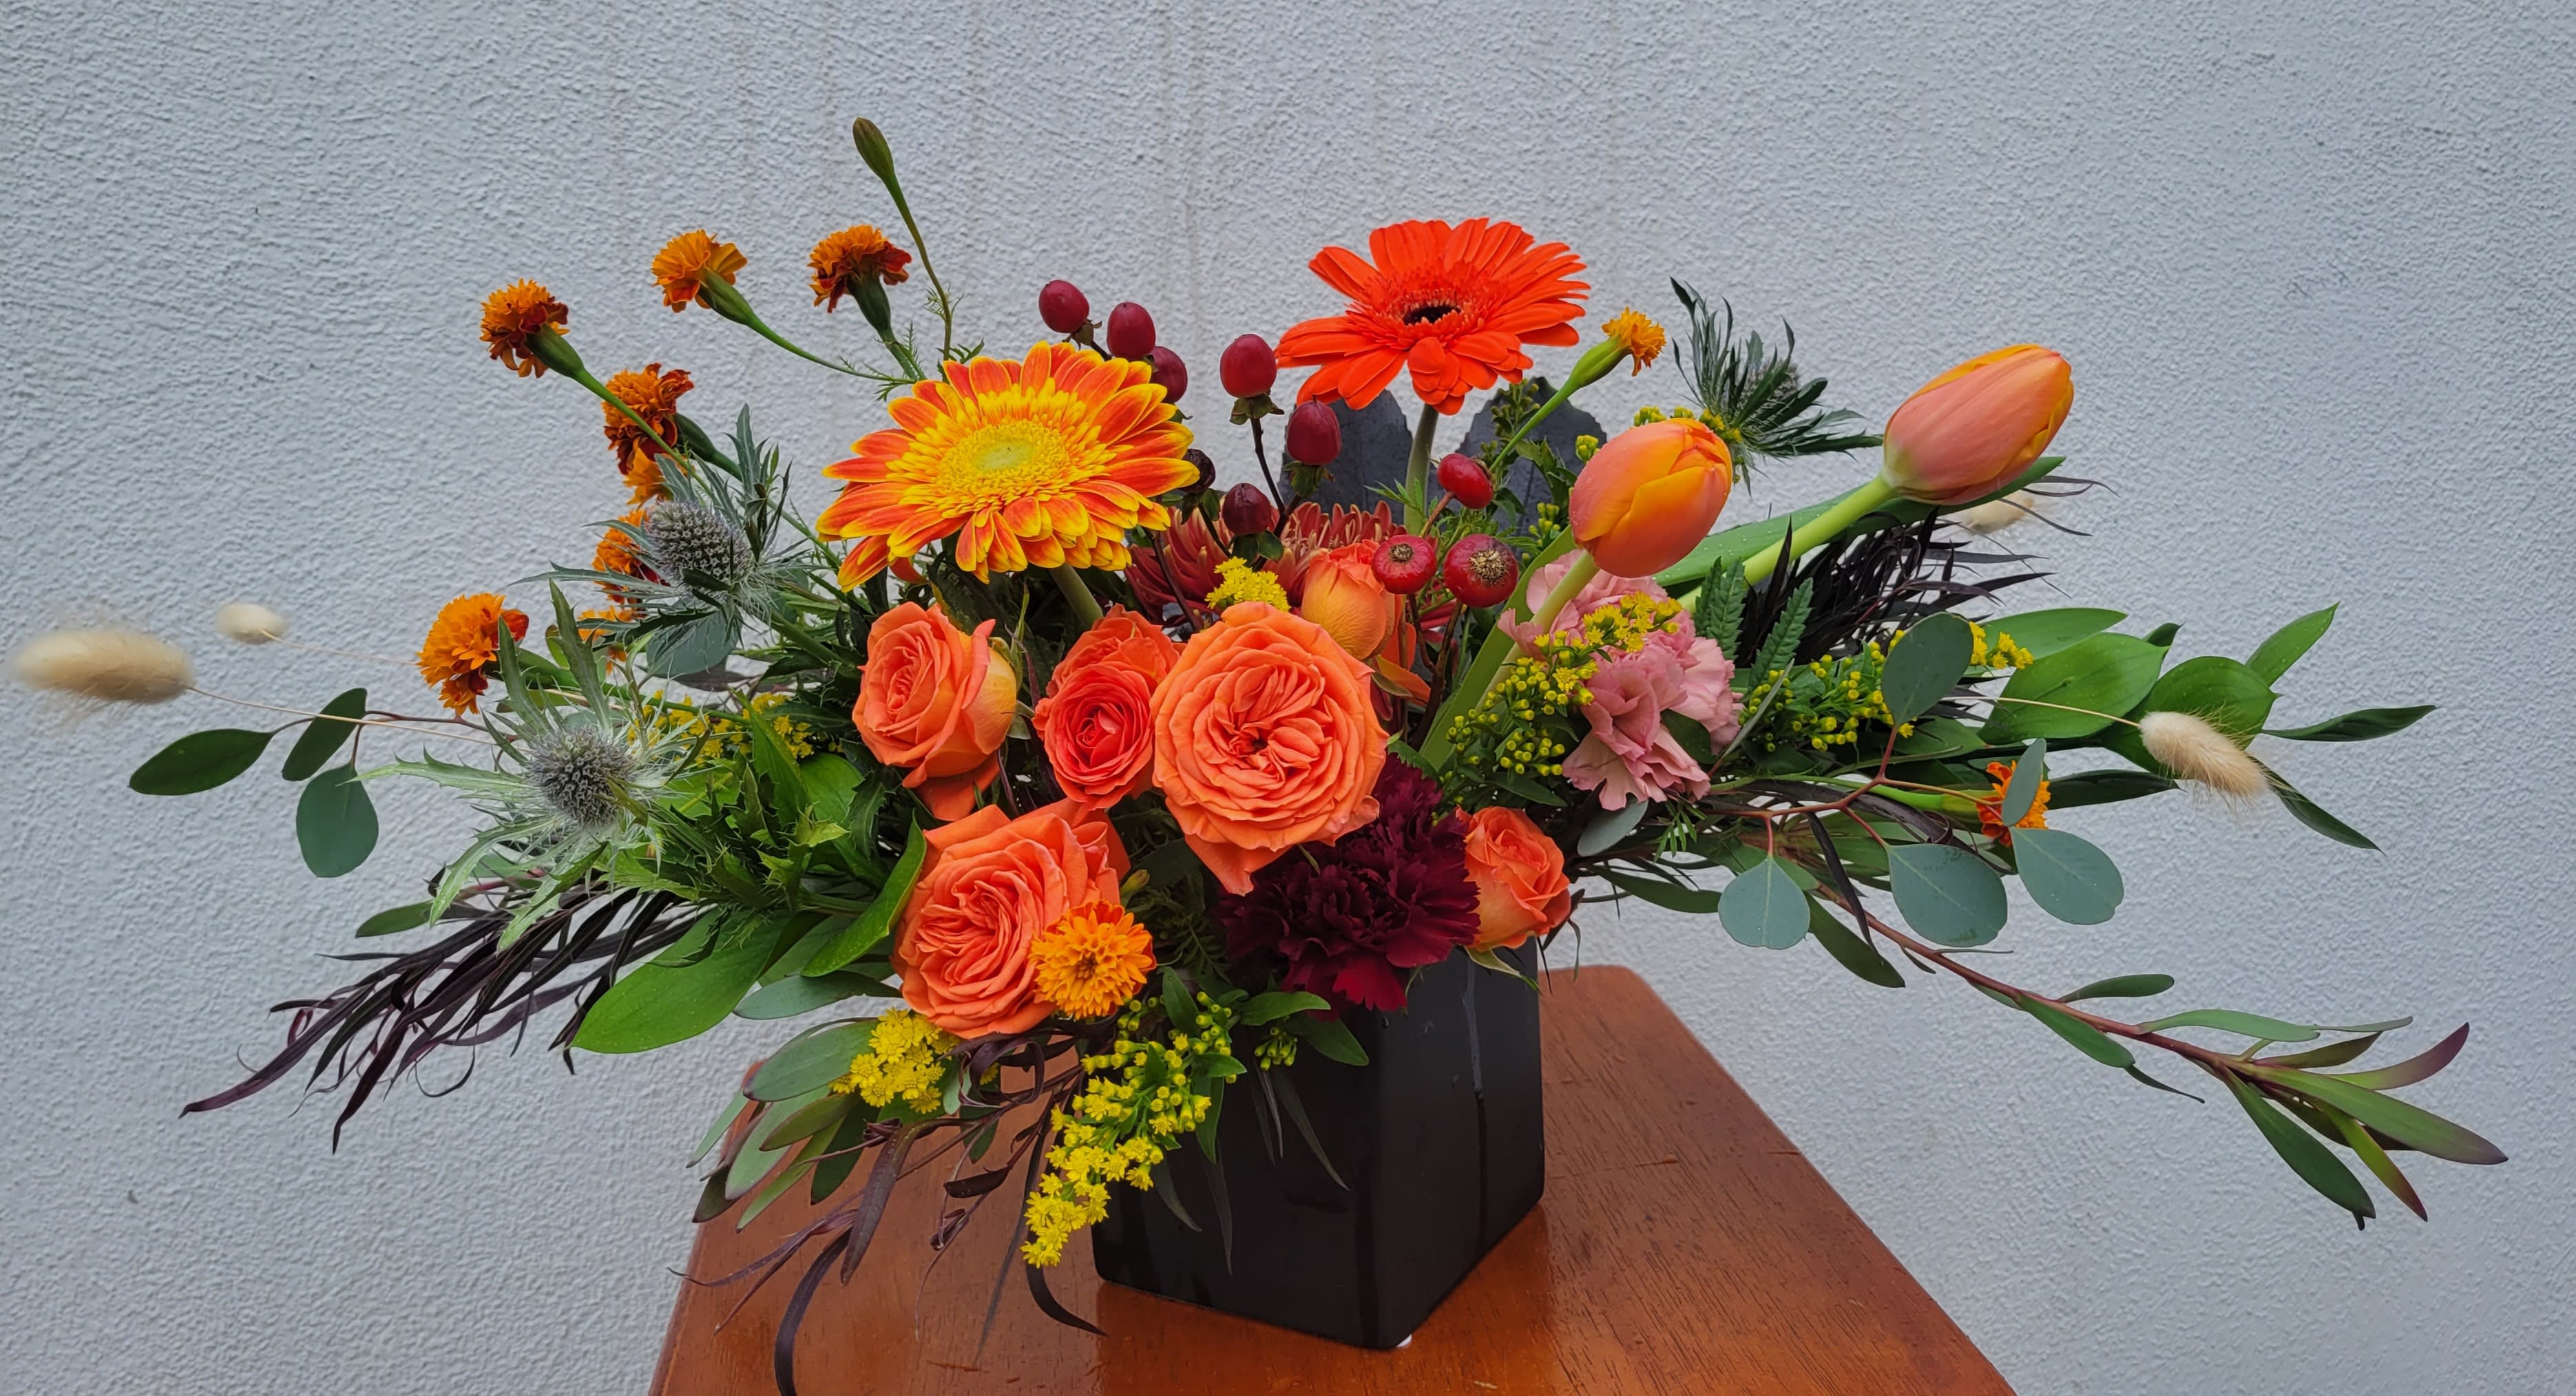 Orange is the new black - Beautiful arrangement for a rainy day, or to pick someone up.